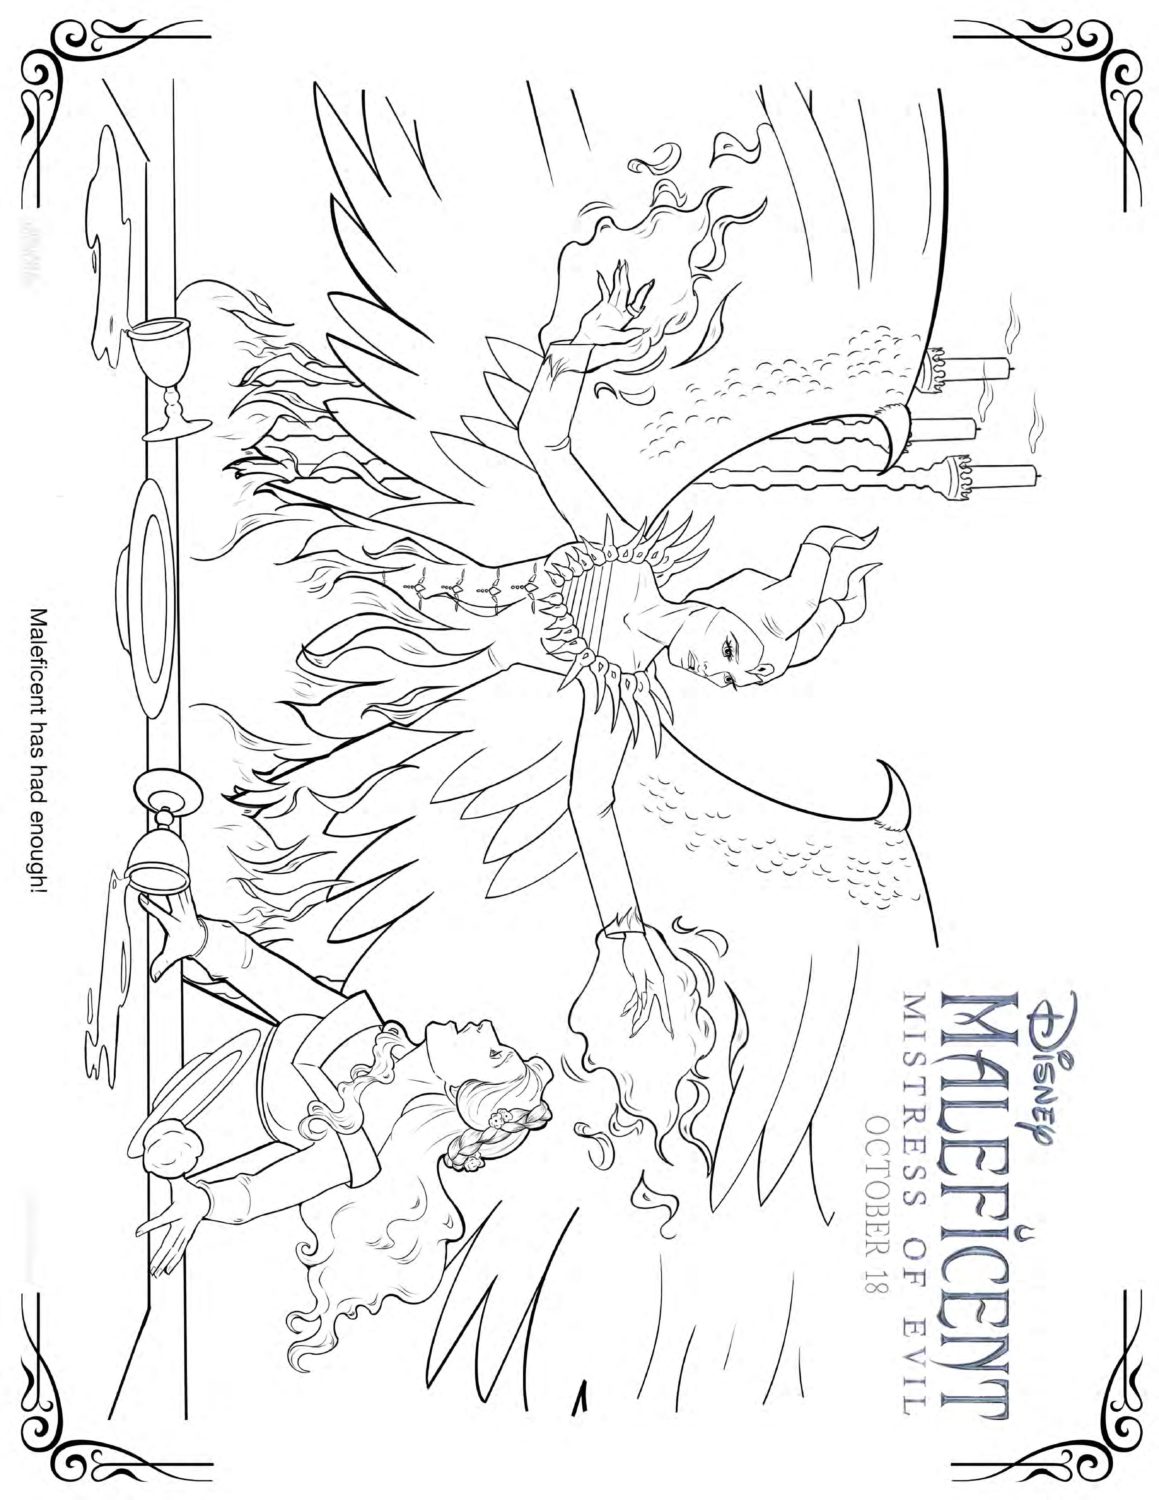 Maleficent 2 Enough Coloring Pages and Activity Sheets